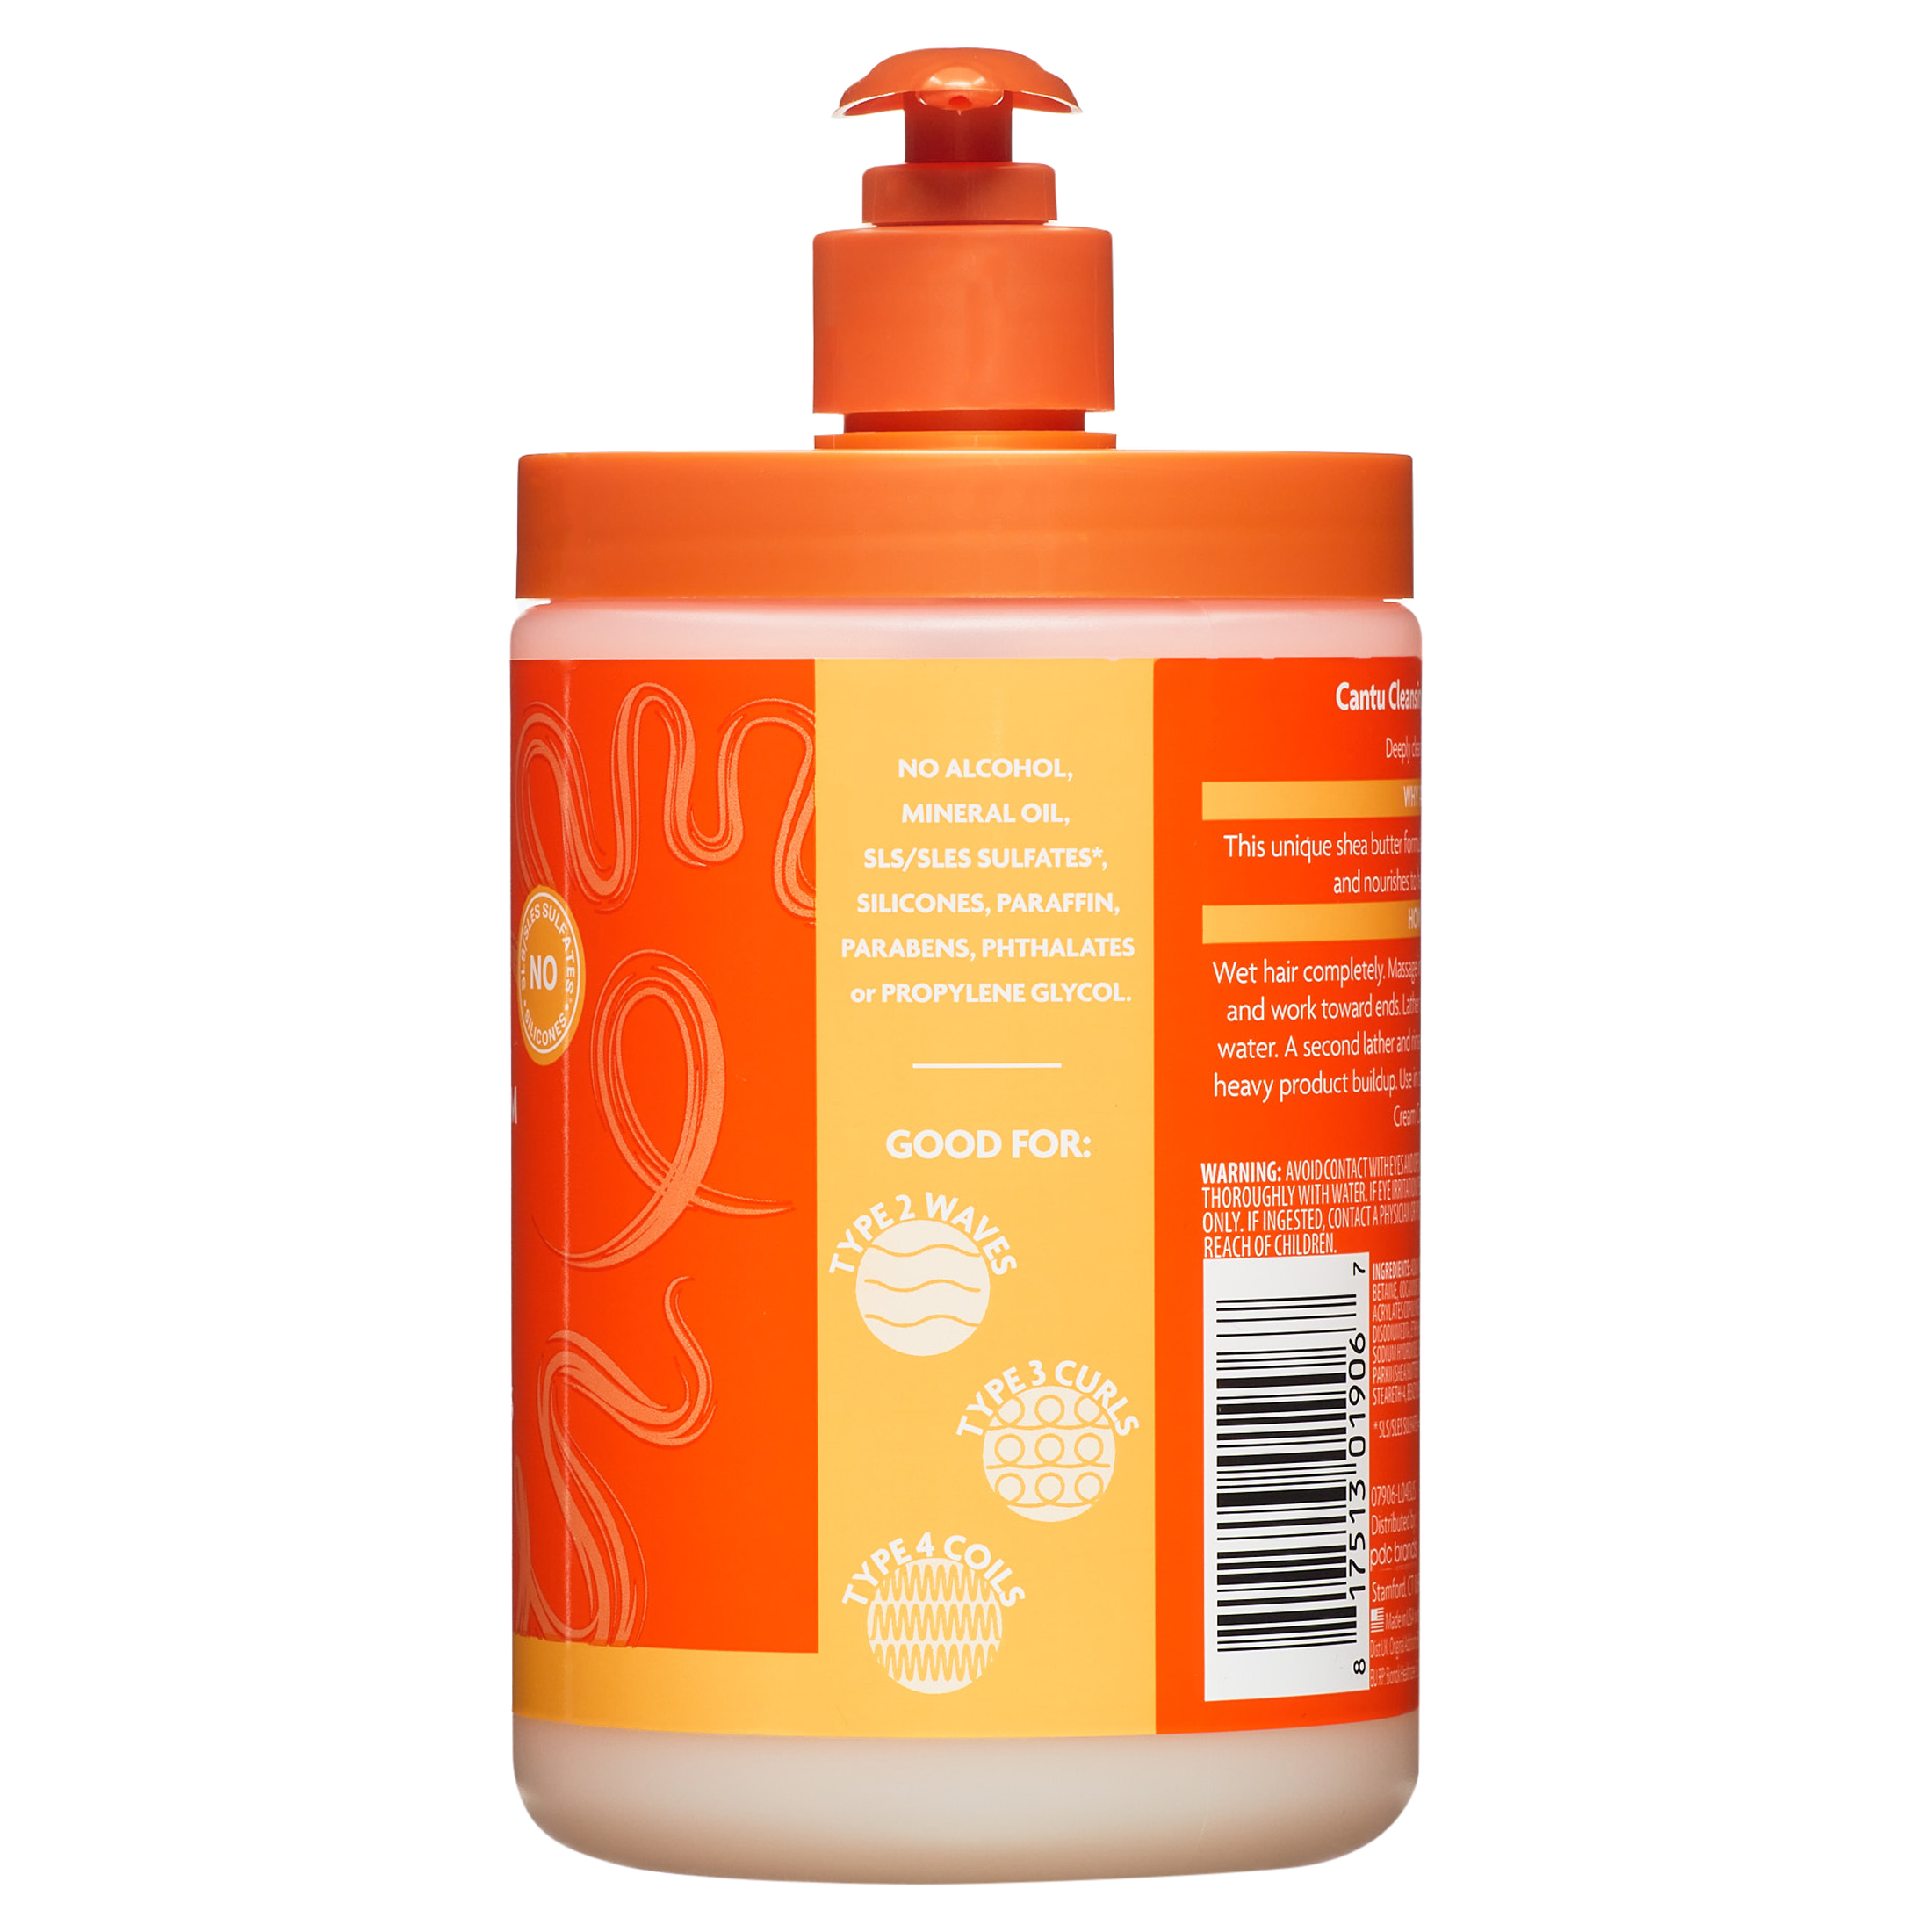 Cantu Sulfate-Free Cleansing Cream Shampoo for Natural Hair, Sulfate-Free with Shea Butter, 25 fl oz. - image 10 of 12